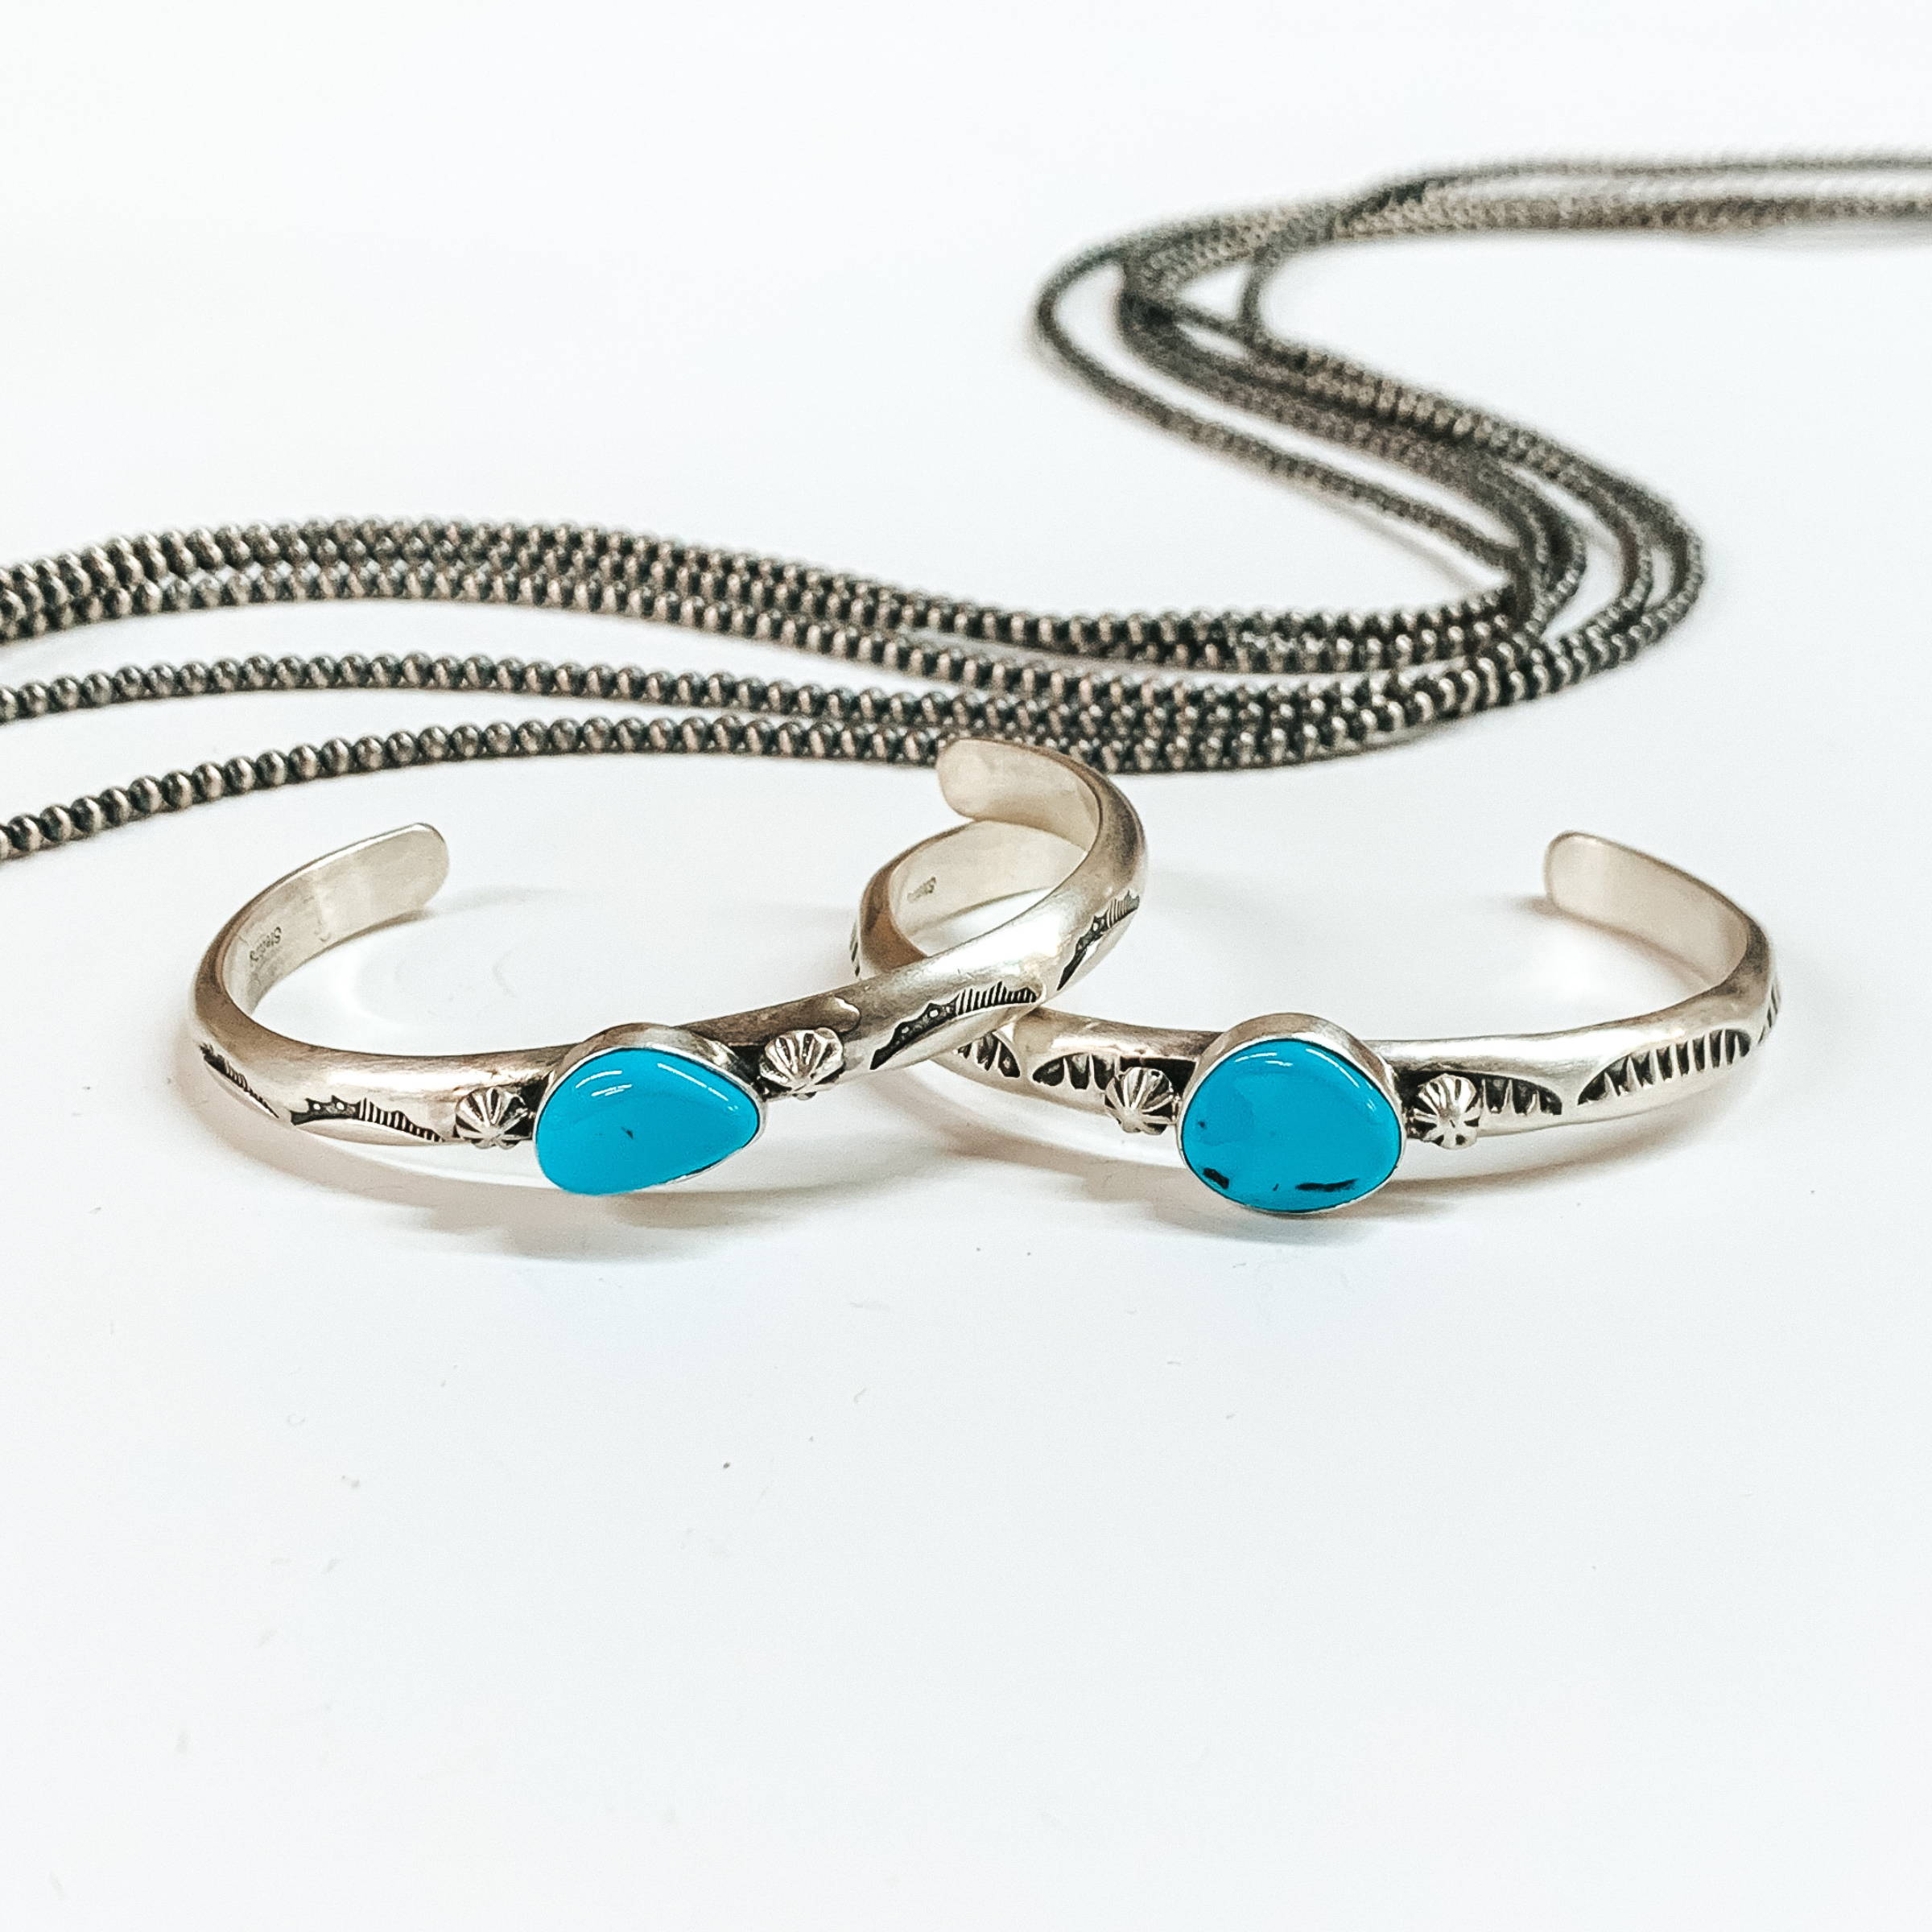 Two silver bangle bracelet with center turquoise stones. These bangles also include engraved details. These bracelets are pictured on a white background with silver beads at the top of the picture. 